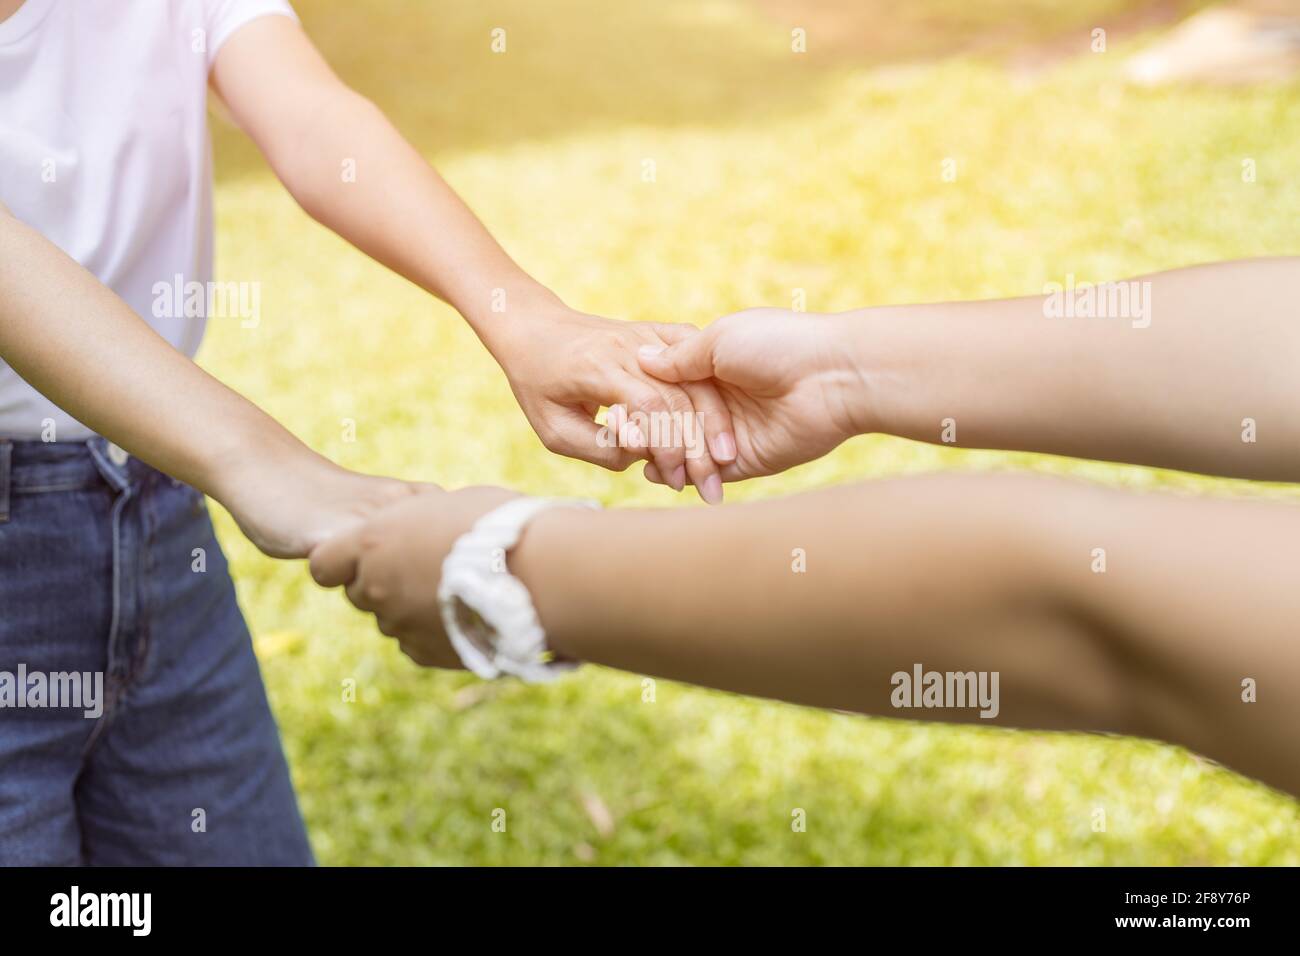 Girl teen Reach her Hand Holding Together to Help Care and Support be a Good Friend with Love concept. Stock Photo